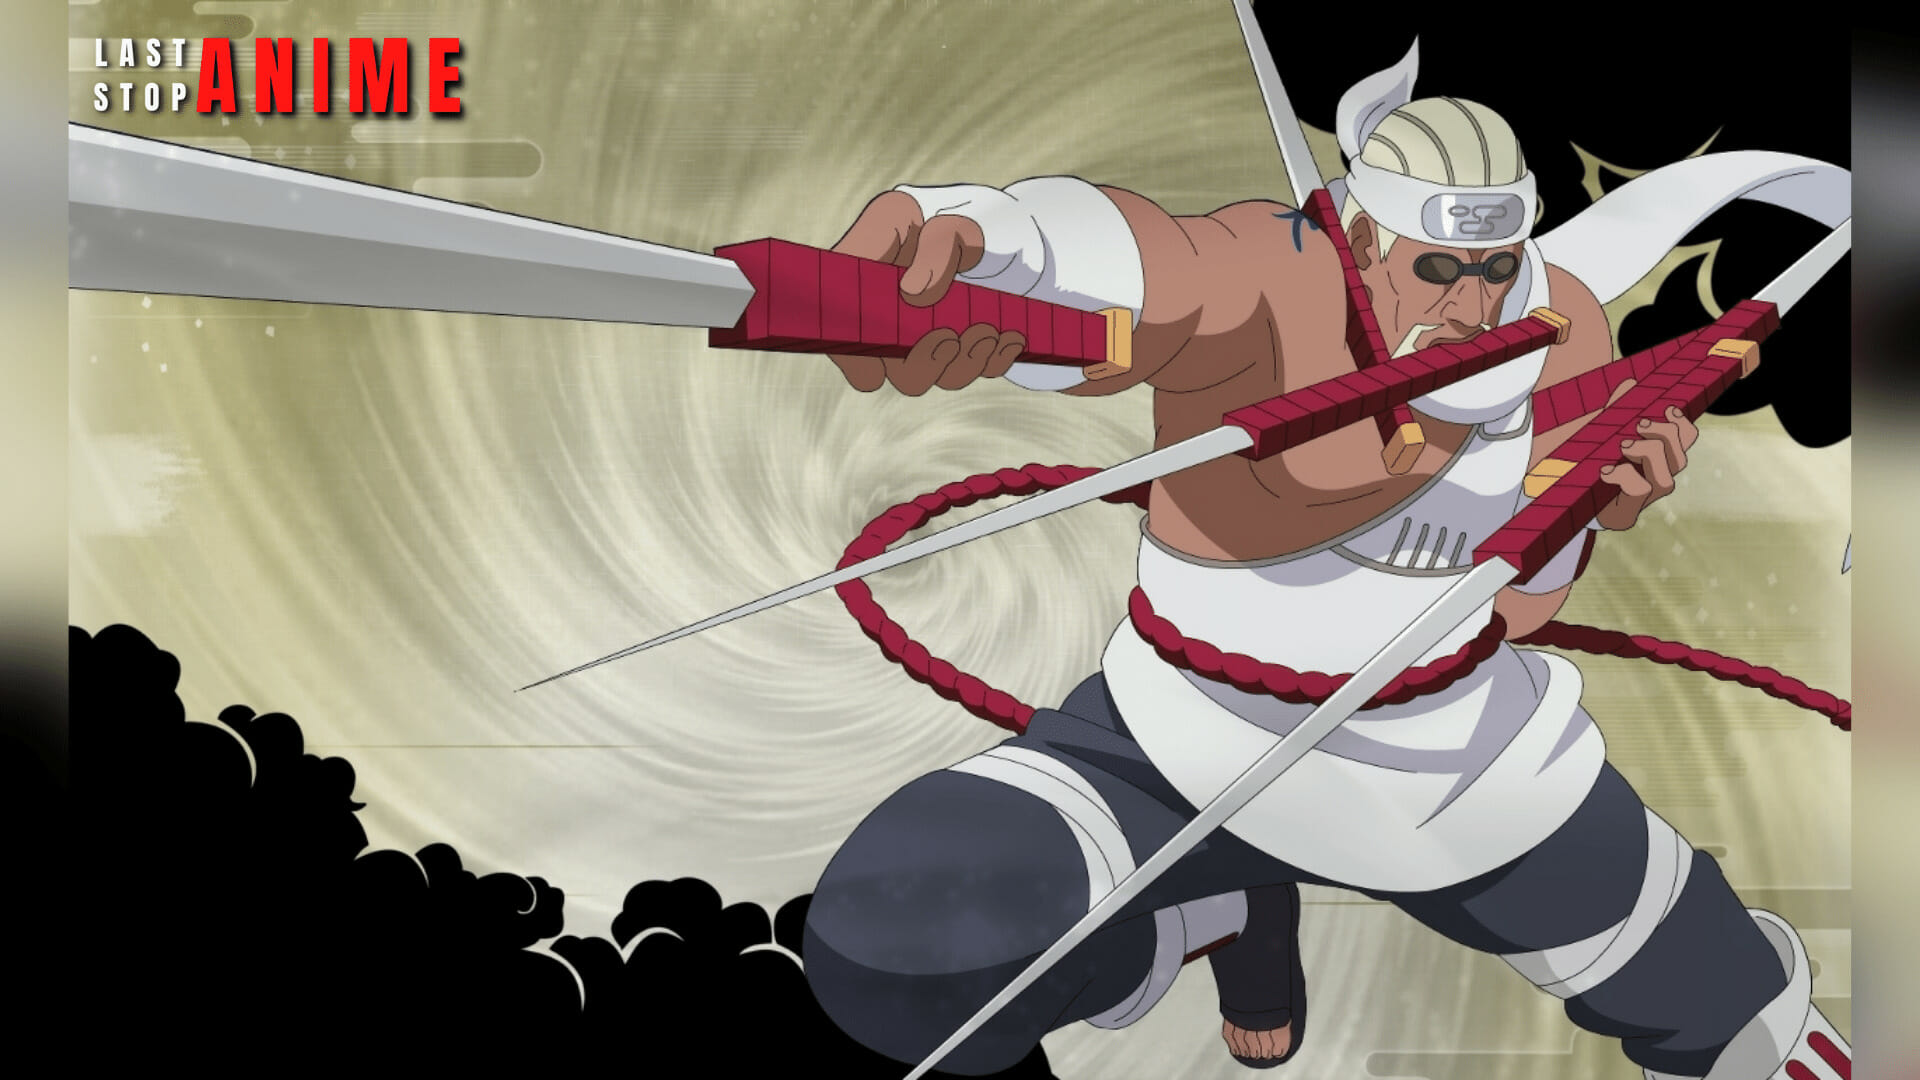 Killer Bee showing his skills with the sword in this image from naruto